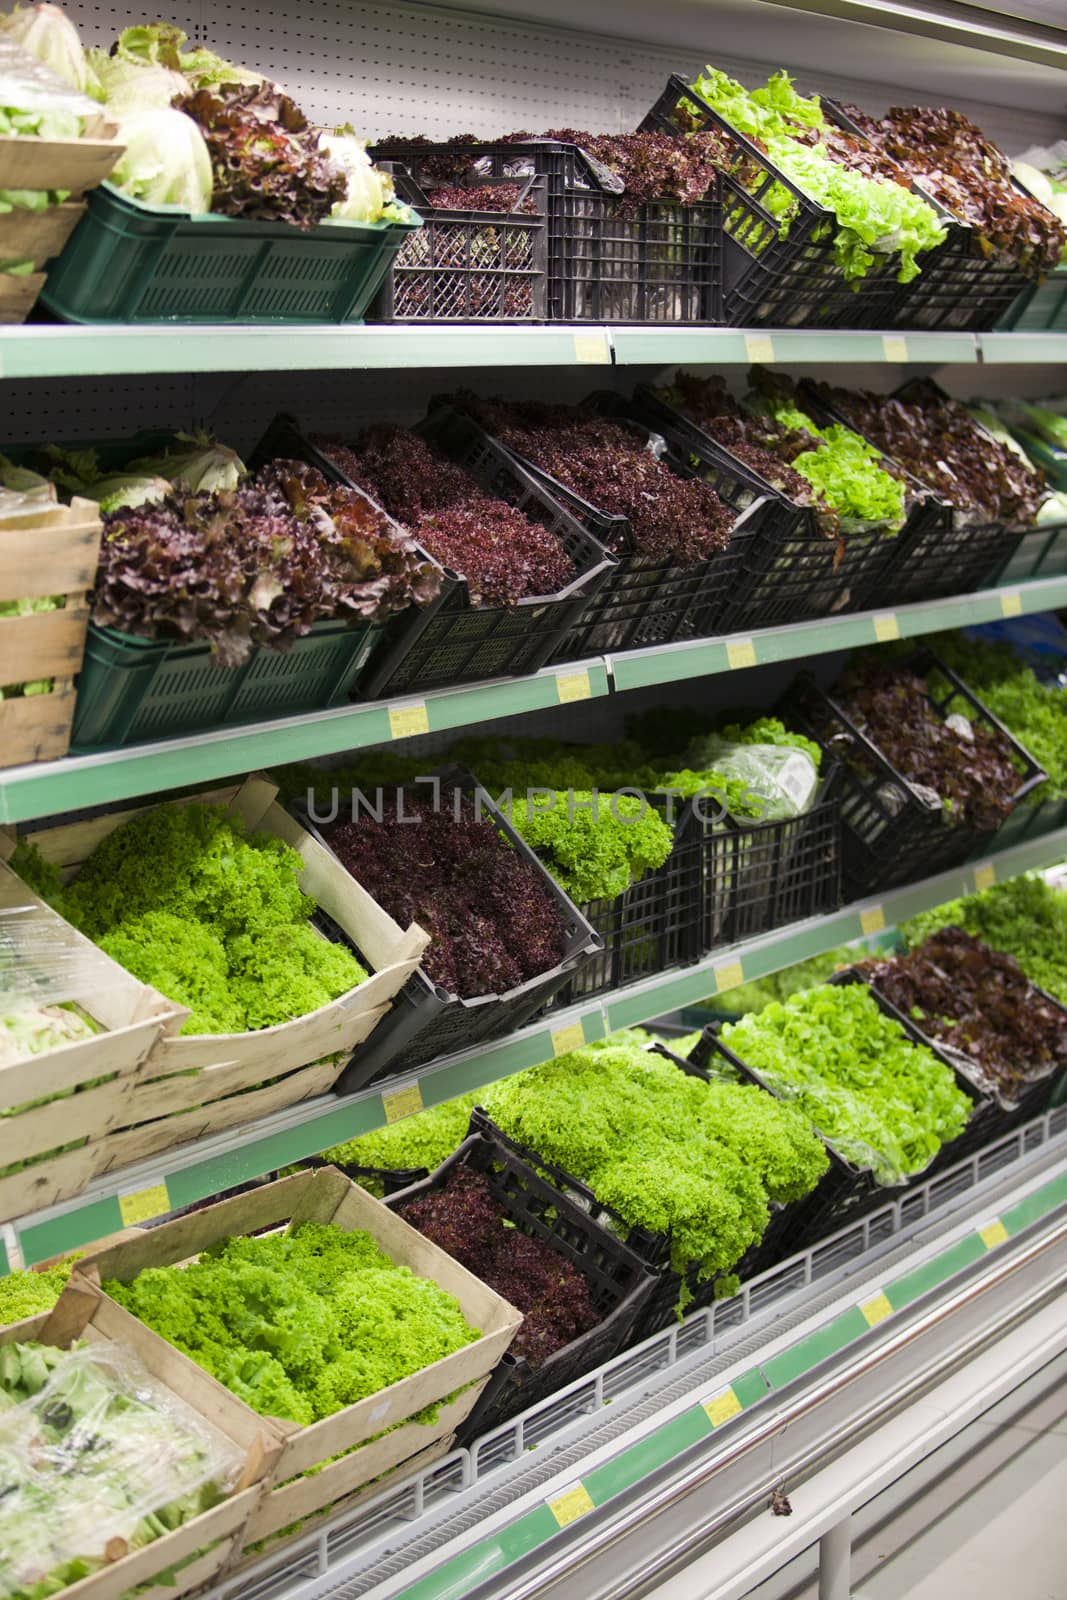 Lettuce section by wellphoto